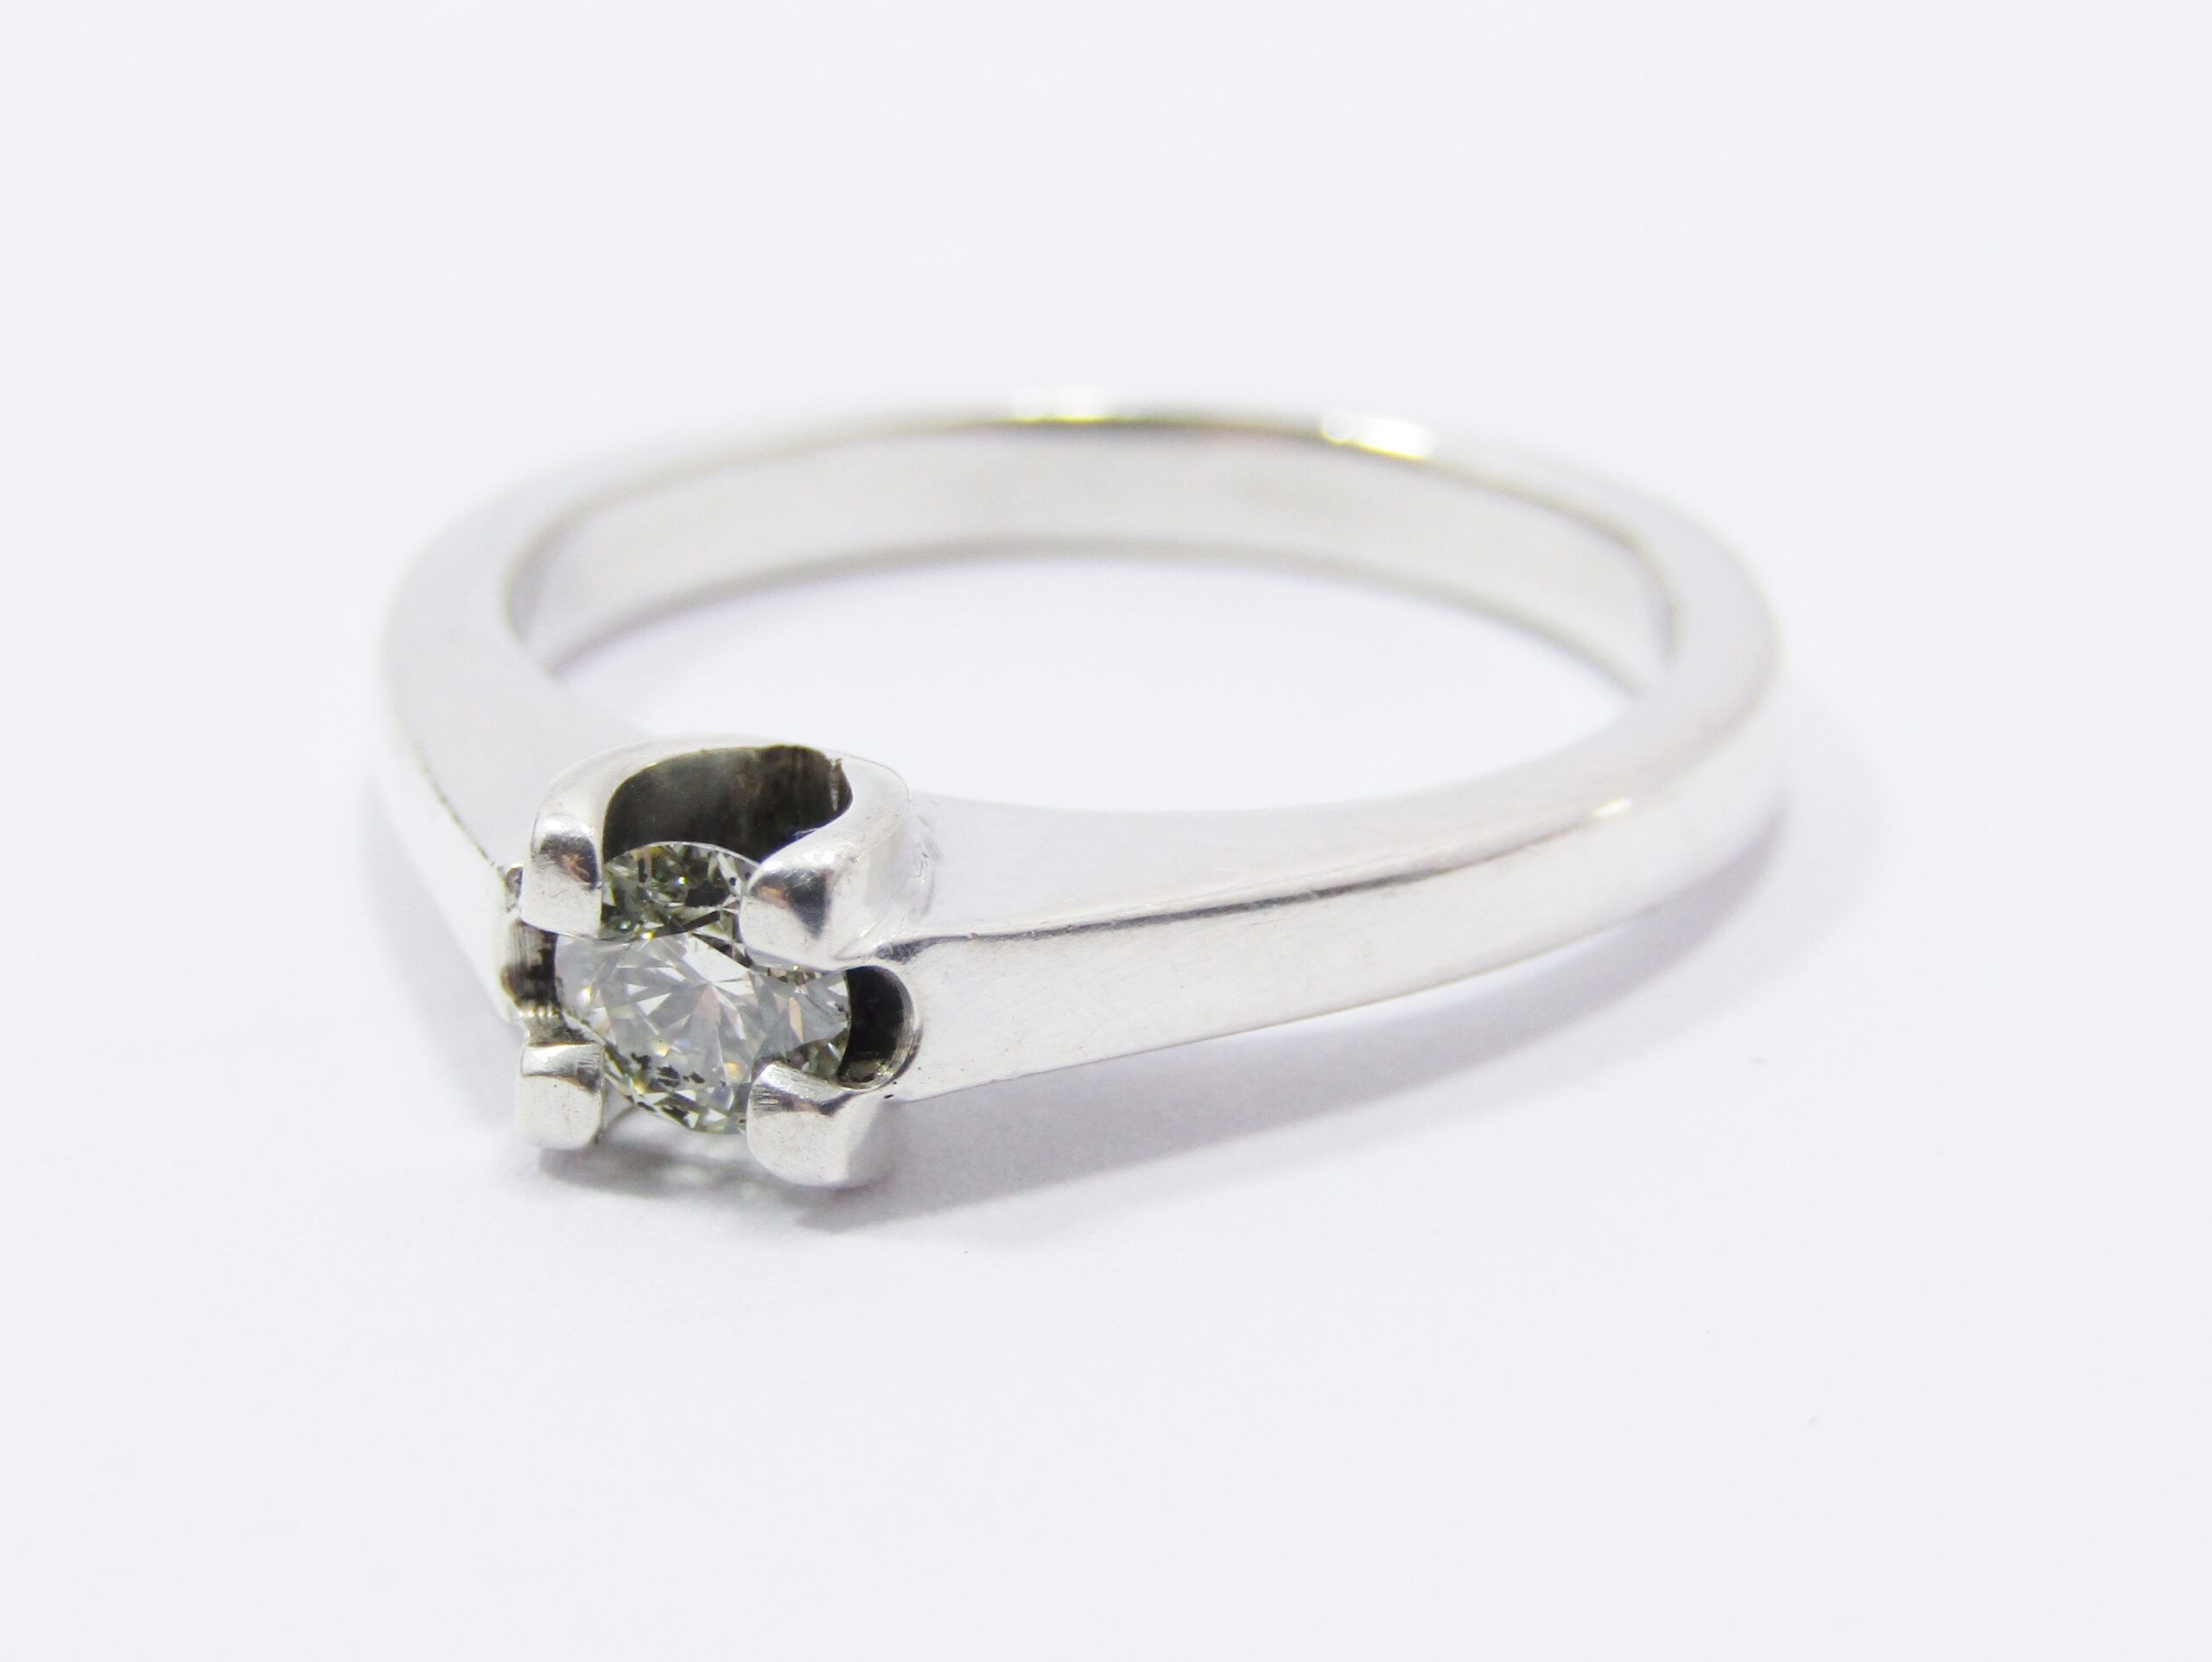 Lovely 0.18ct Diamond Ring in Sterling Silver